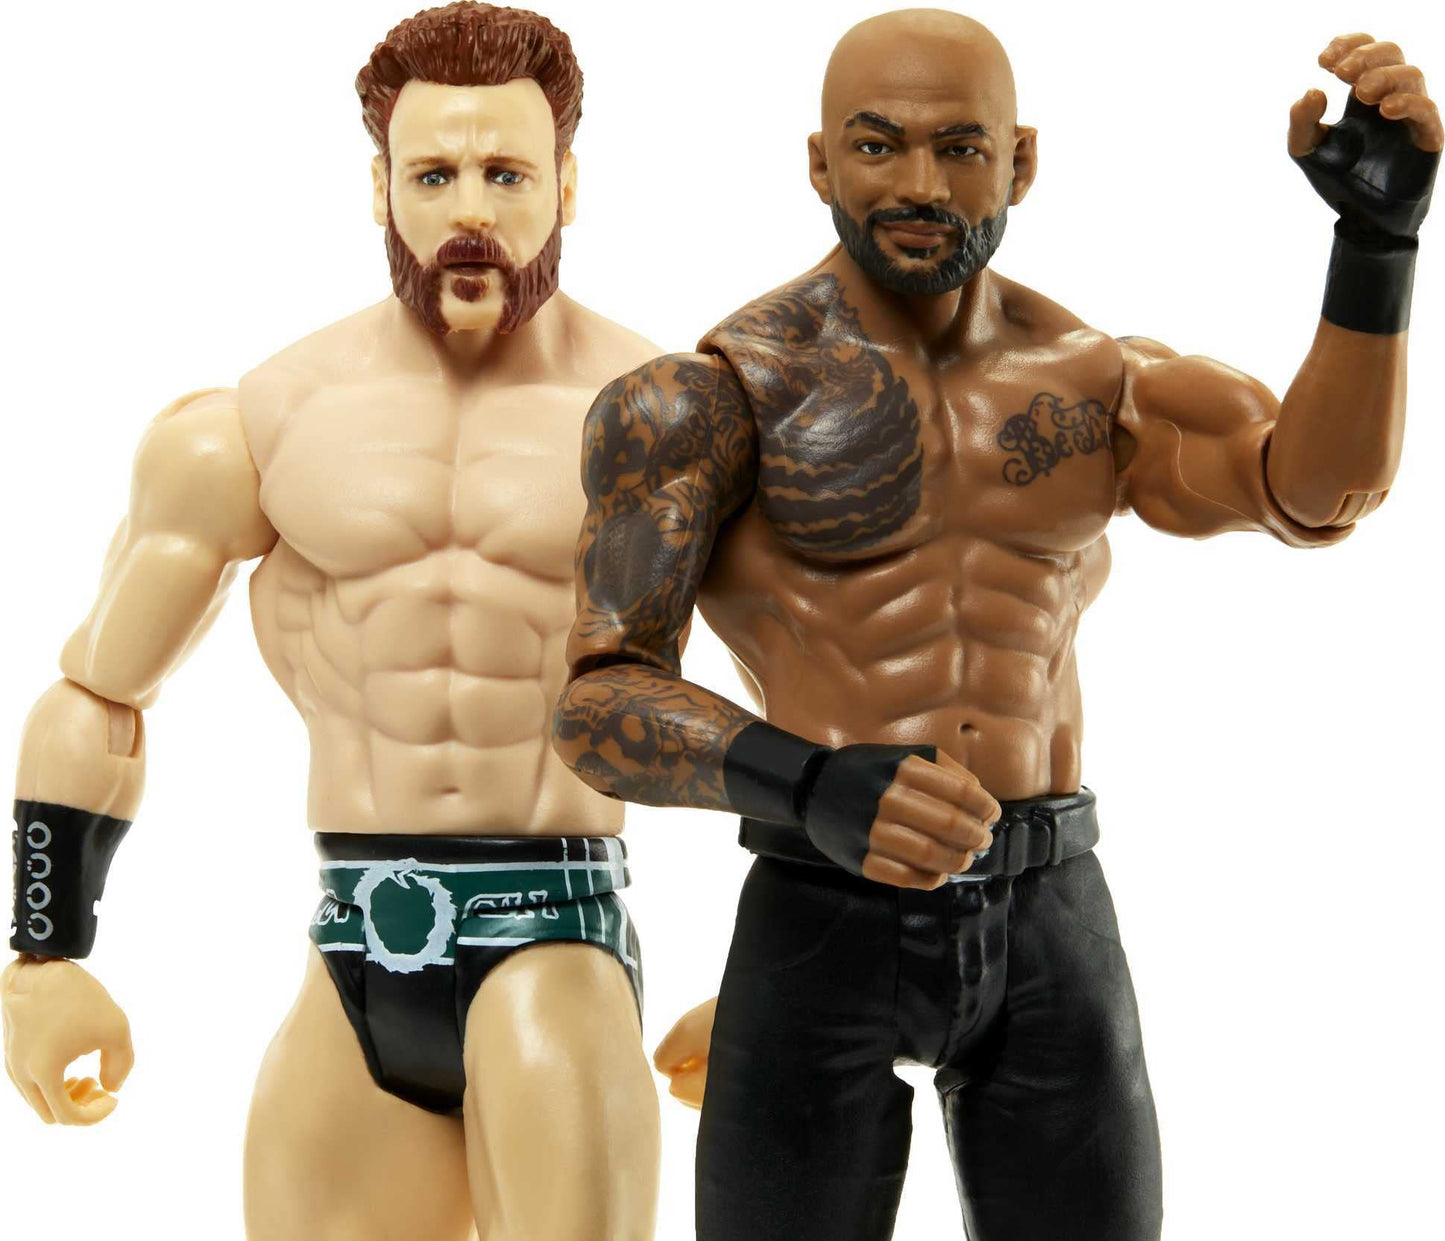 Mattel Sheamus vs Ricochet Championship Showdown 2-Pack 6-inch Action Figures Monday Night RAW Battle Pack for Ages 6 Years Old & Up